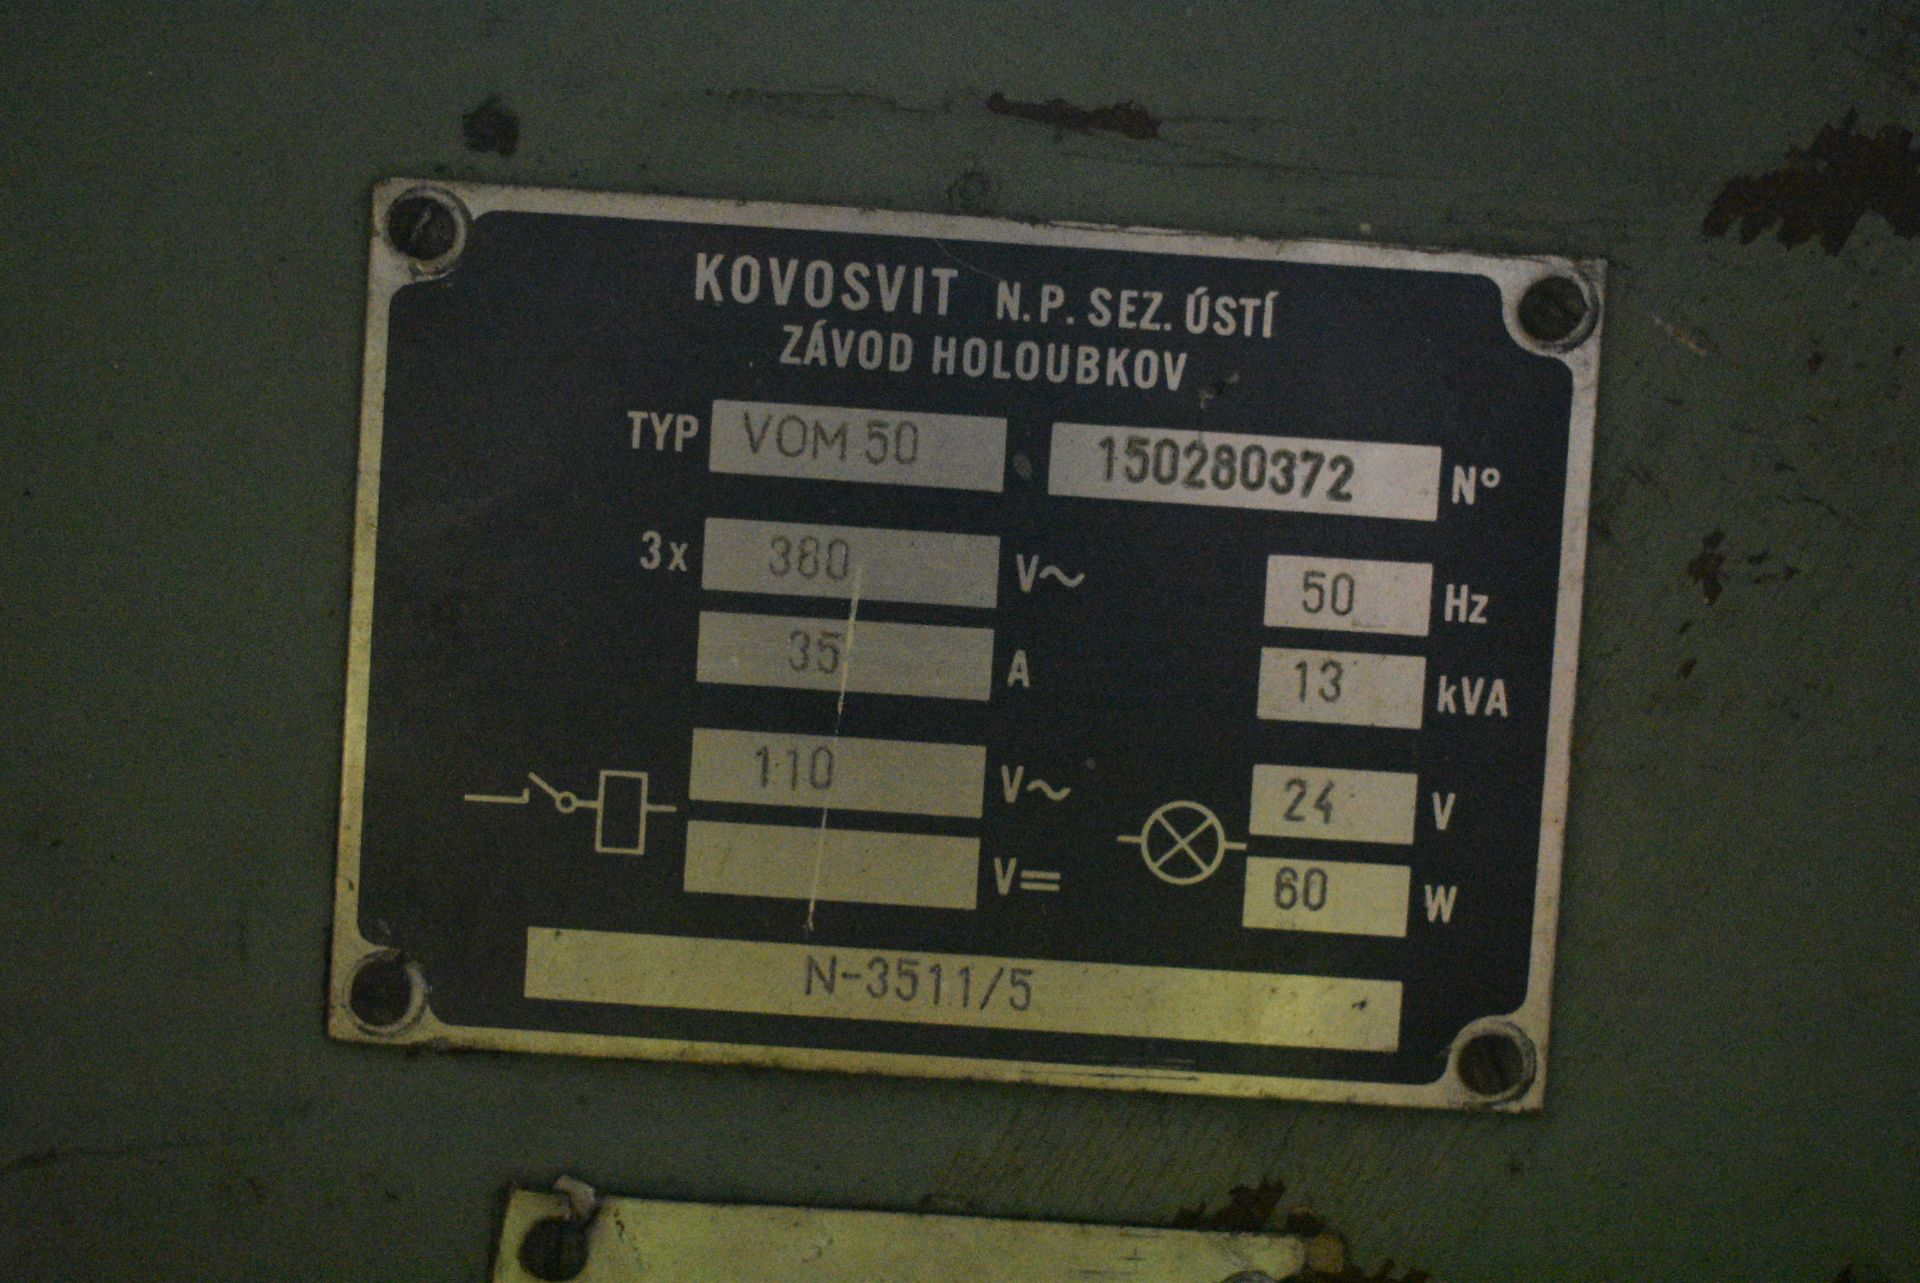 Kosovit VOM50 Radial Arm Drill, serial no. 150280372 (not in use)Please read the following important - Image 7 of 9